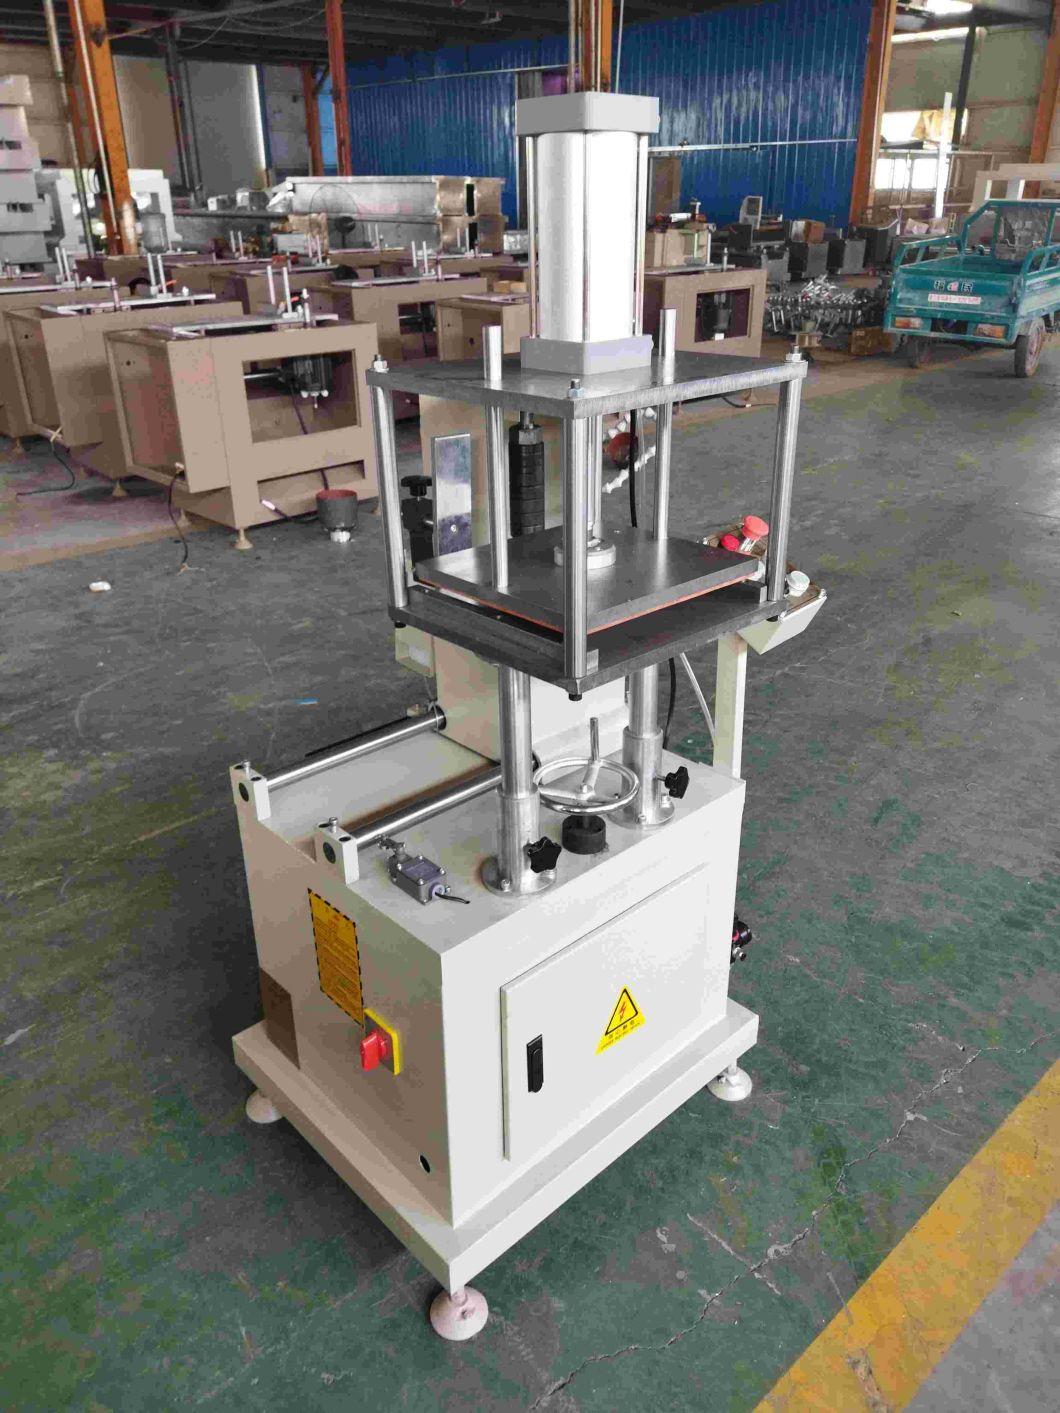 Lxd-200A Aluminum Profile Milling Machine for End Faces and Tenons CNC Machine for Aluminum Doors and Windows